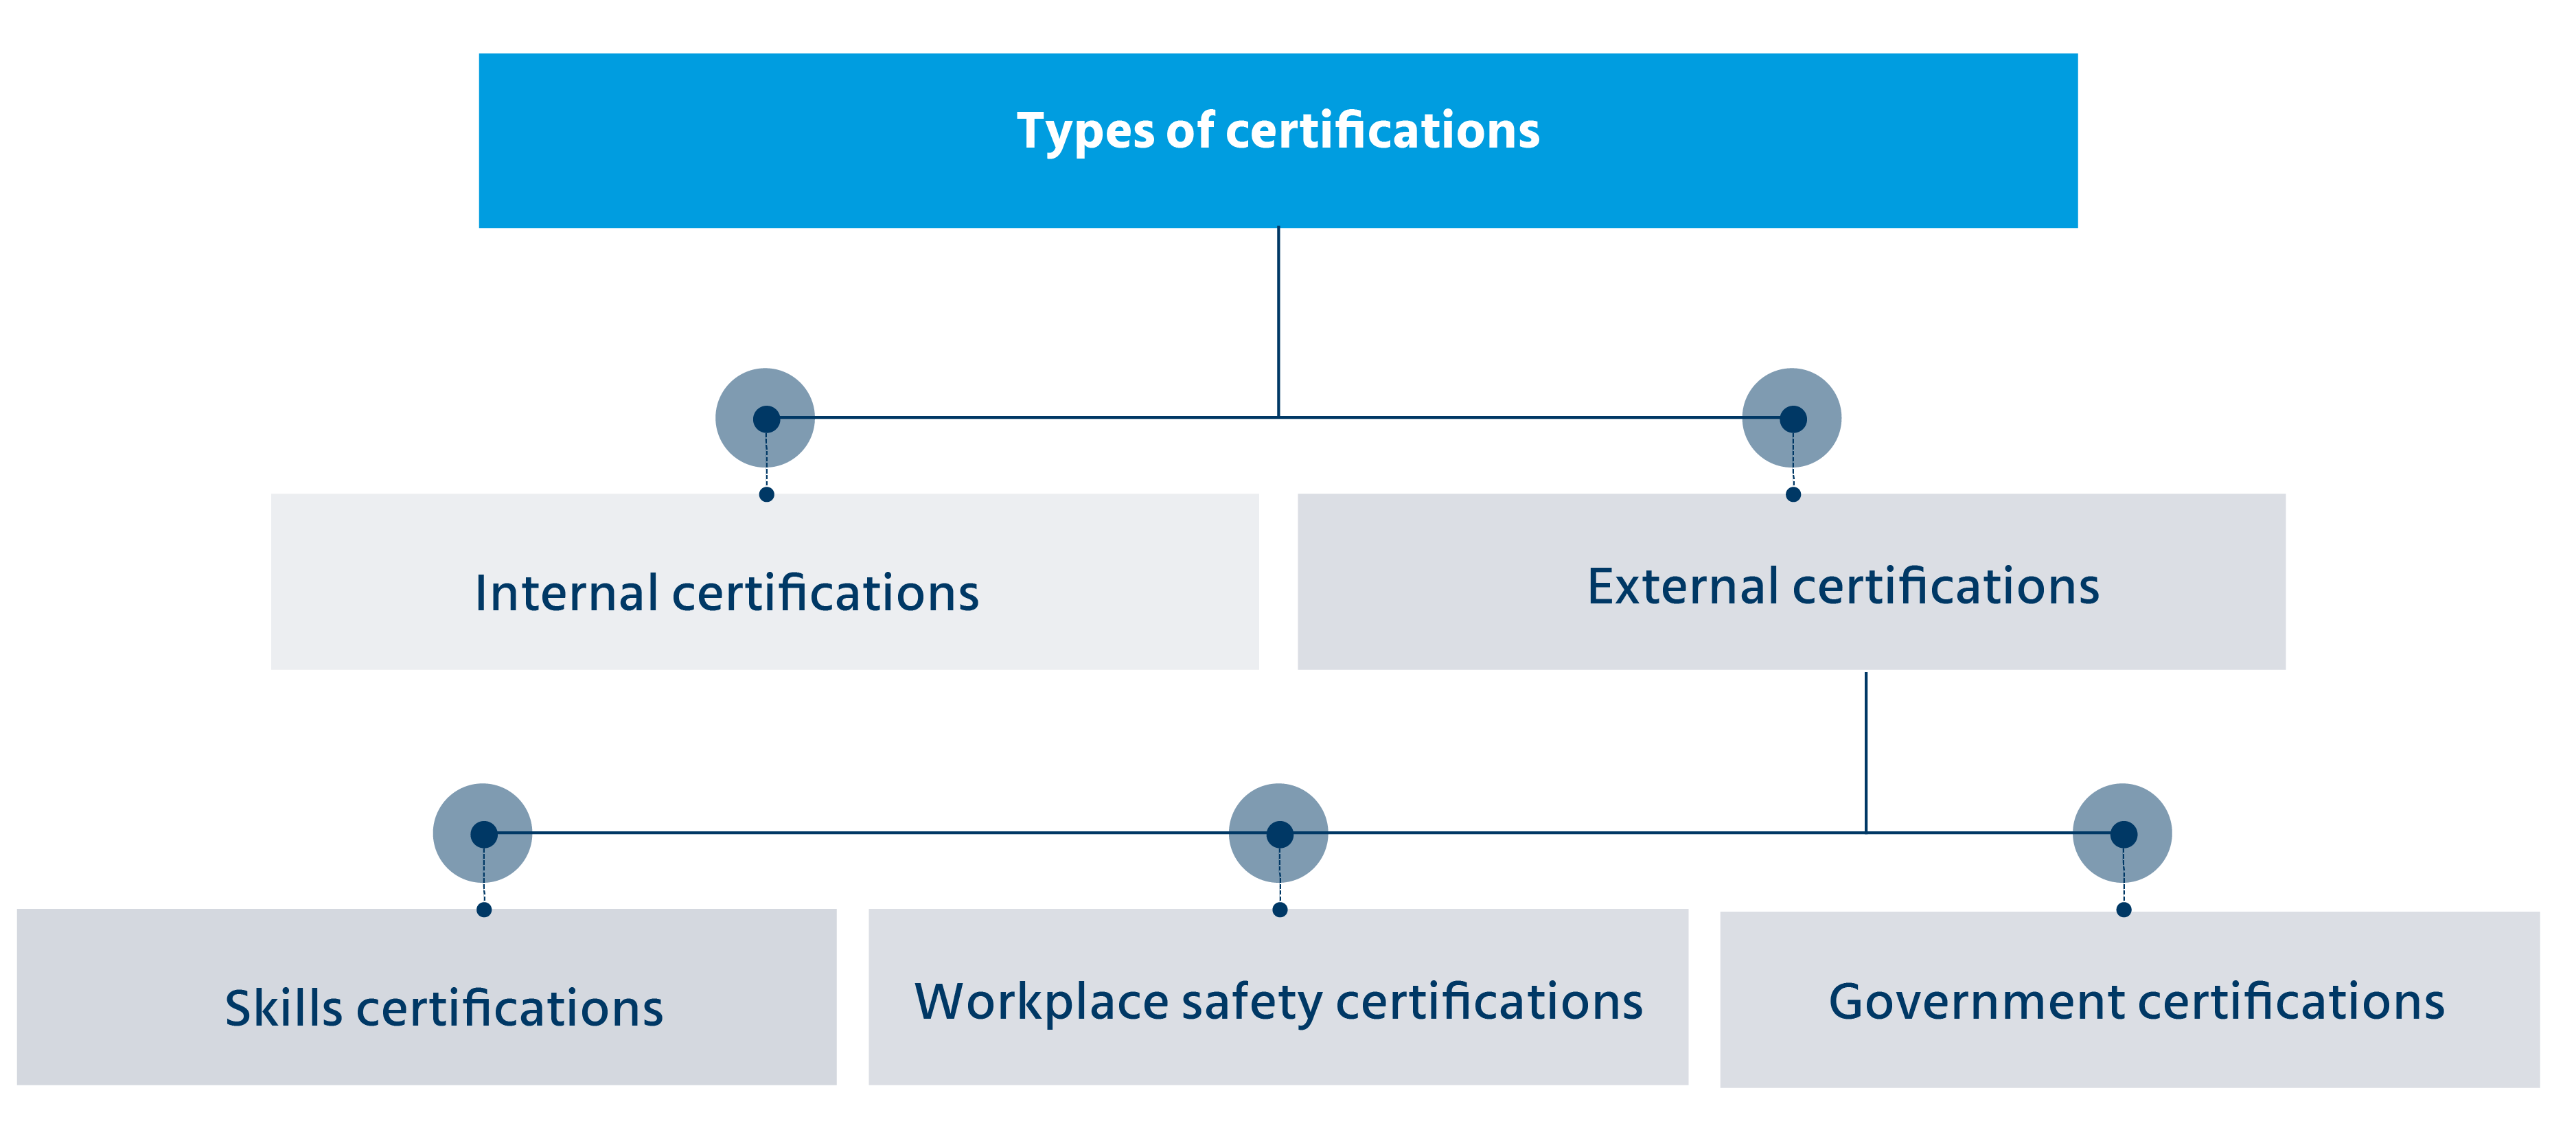 Types of certifications